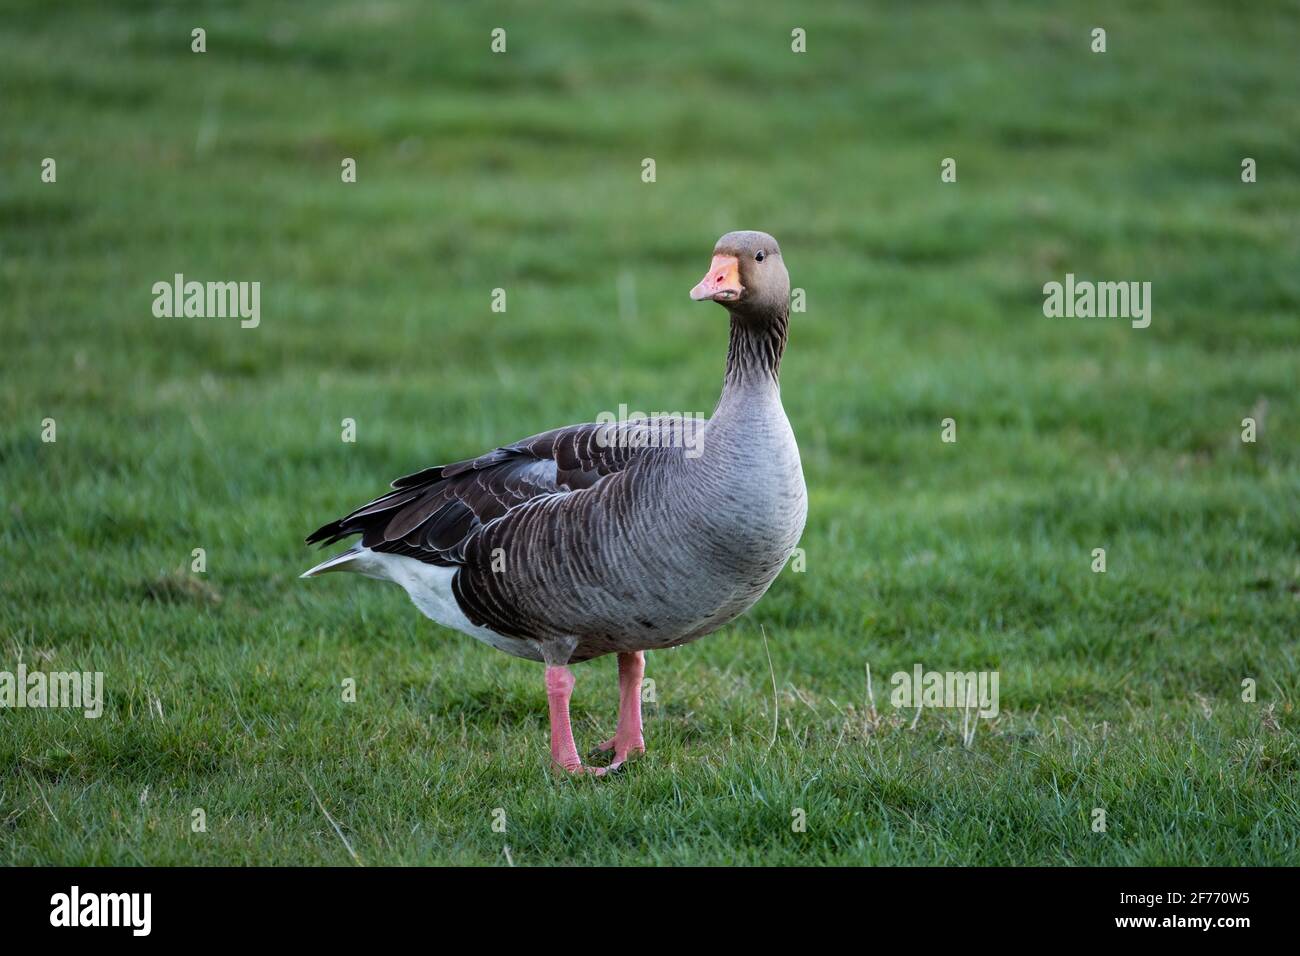 A Greylag Goose has migrated north for spring and is seen here in a field on the Lincolnshire rural coast in the Spring Stock Photo